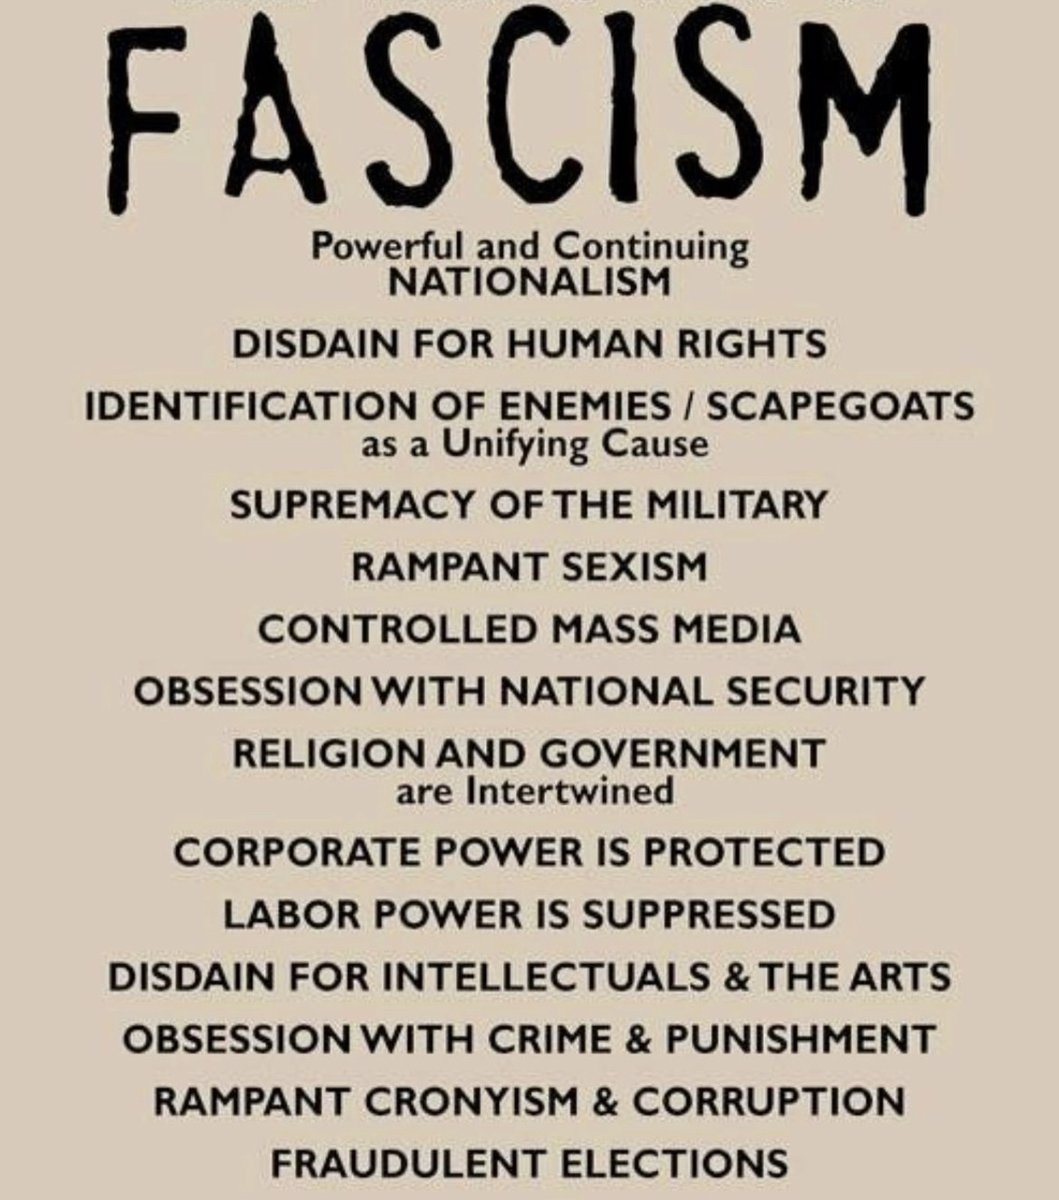 #Anonymous #OpGOP
Stop #Fascism